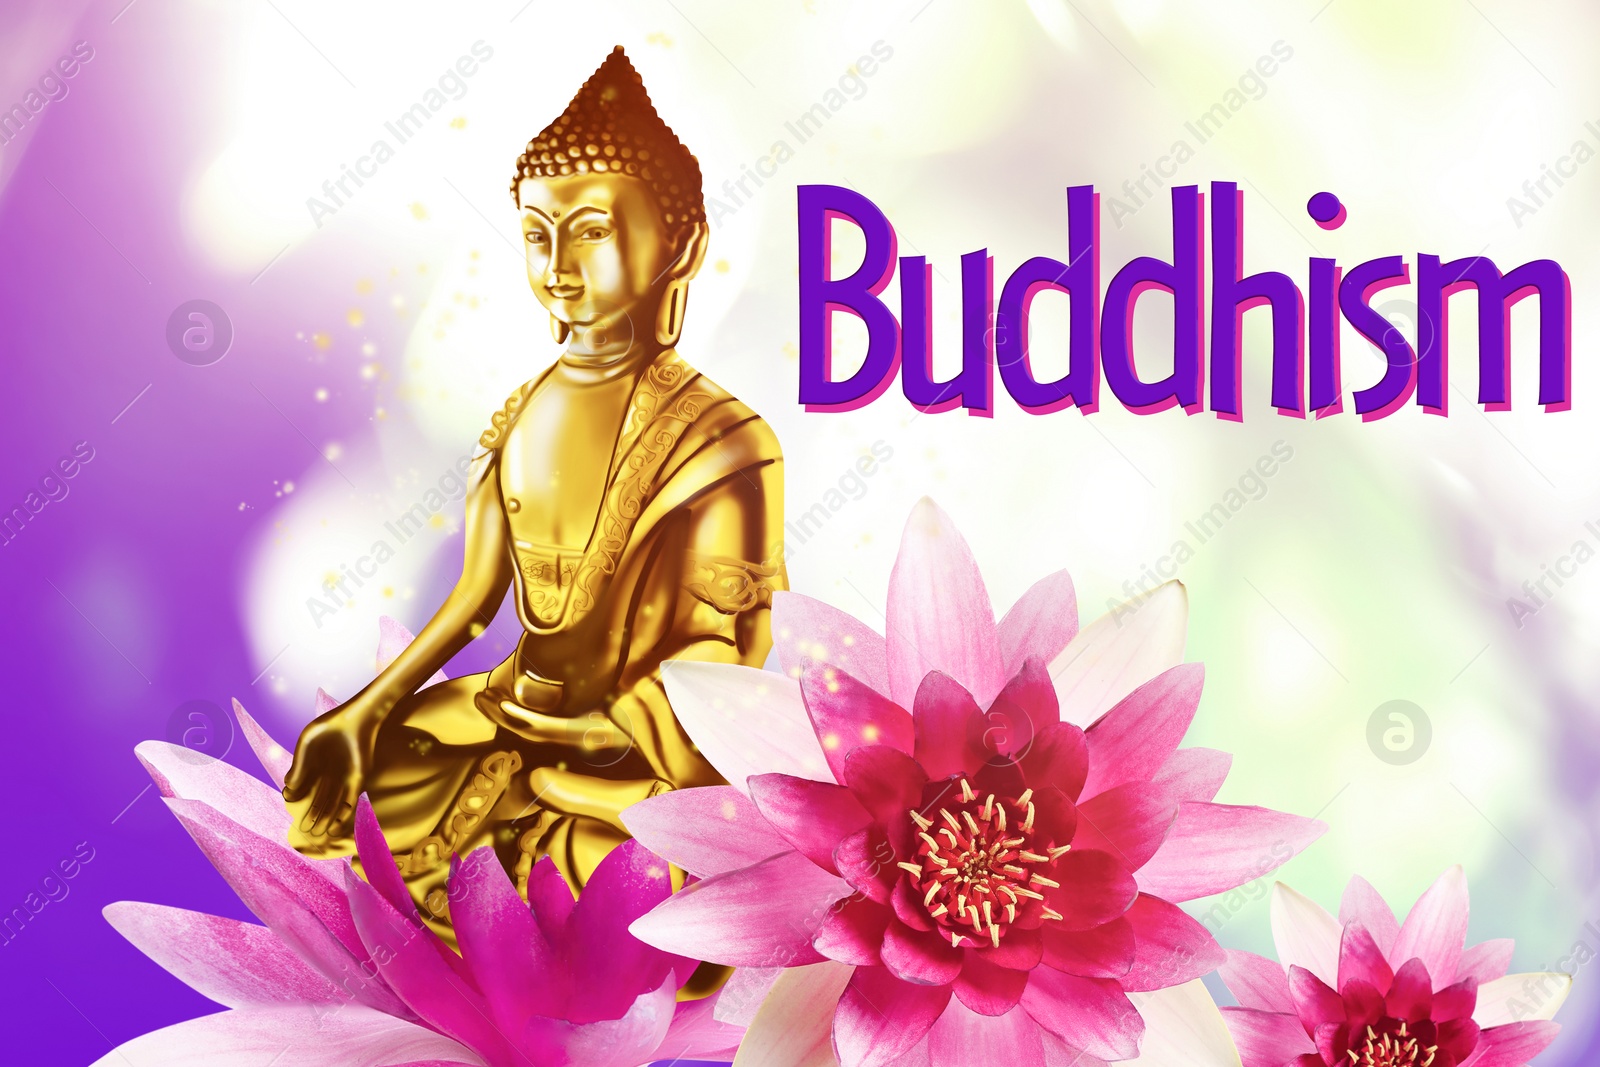 Image of Buddha figure, lotus flowers and word Buddhism on bright background